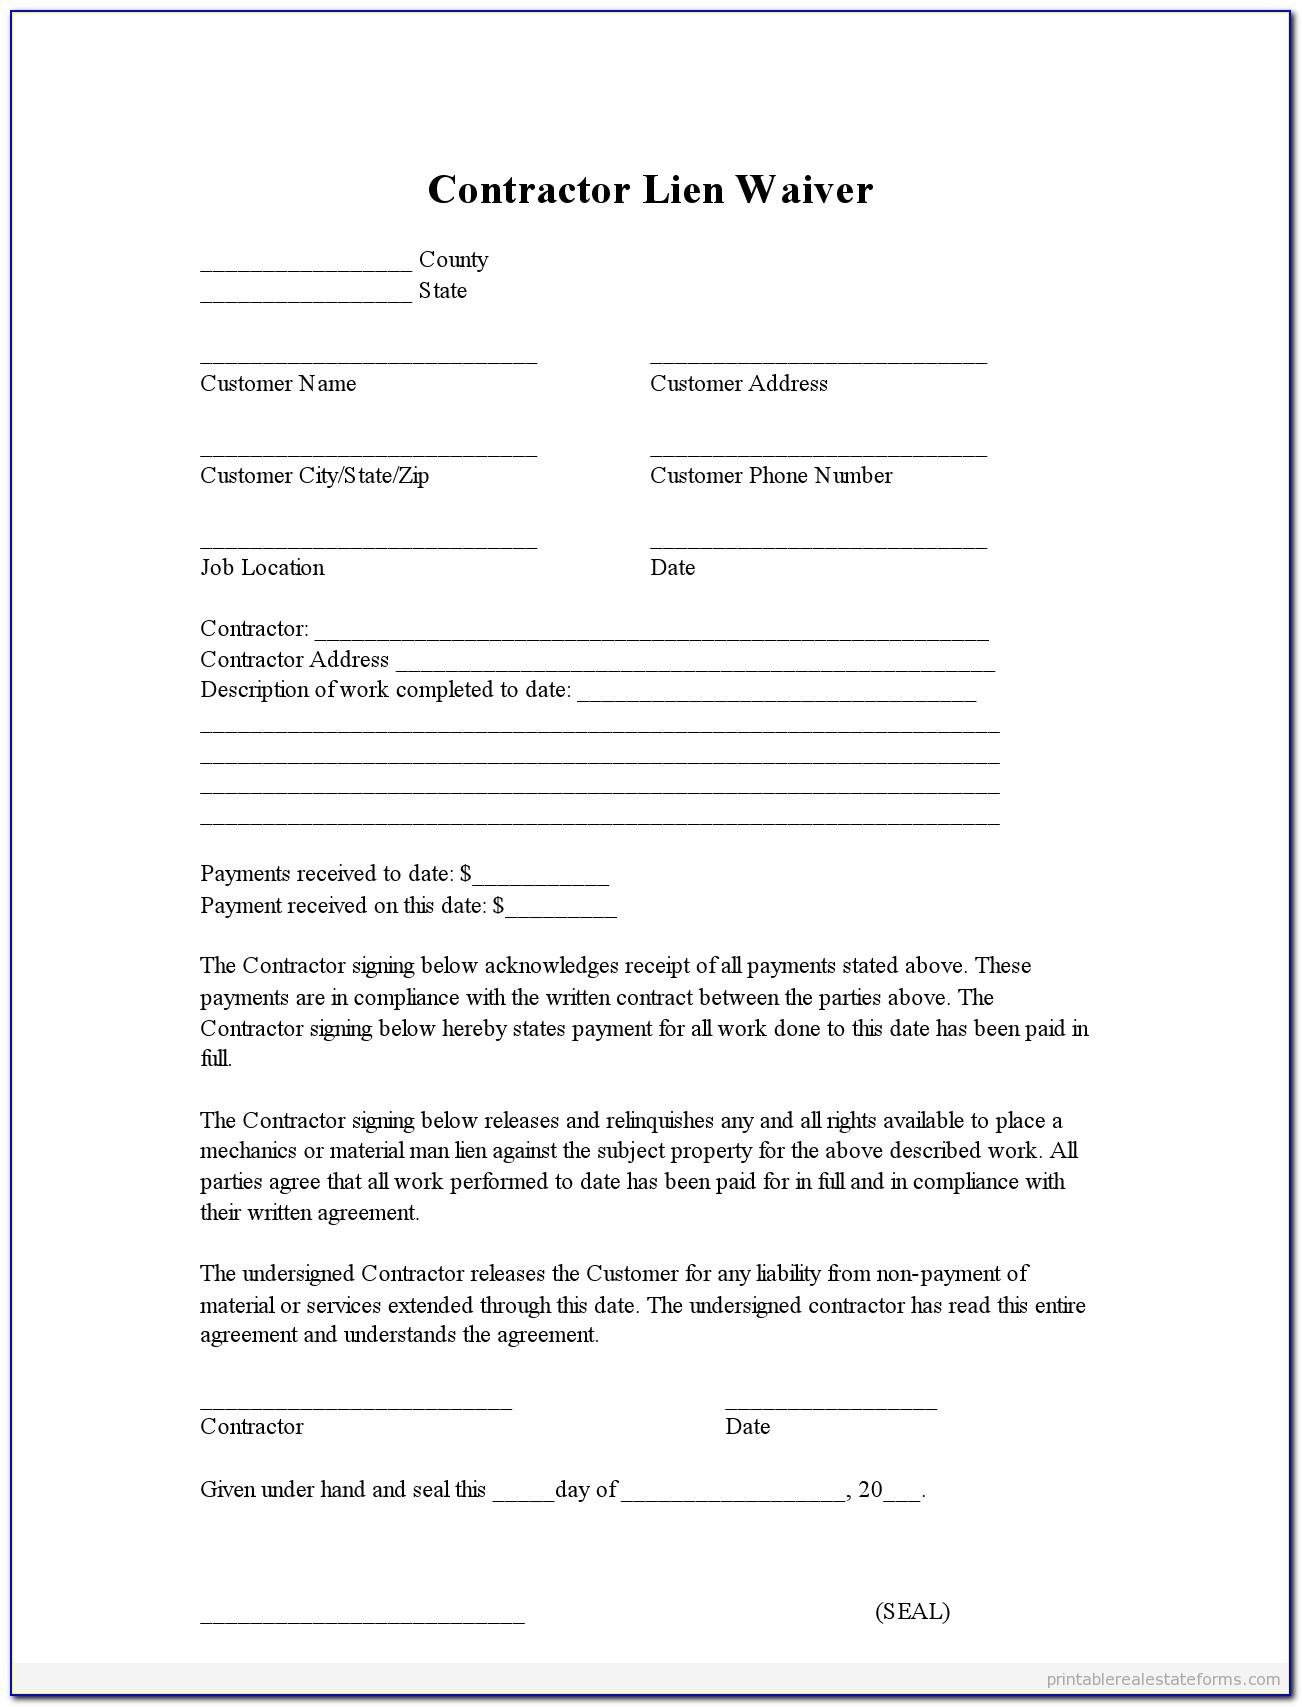 Conditional Lien Waiver Form Texas